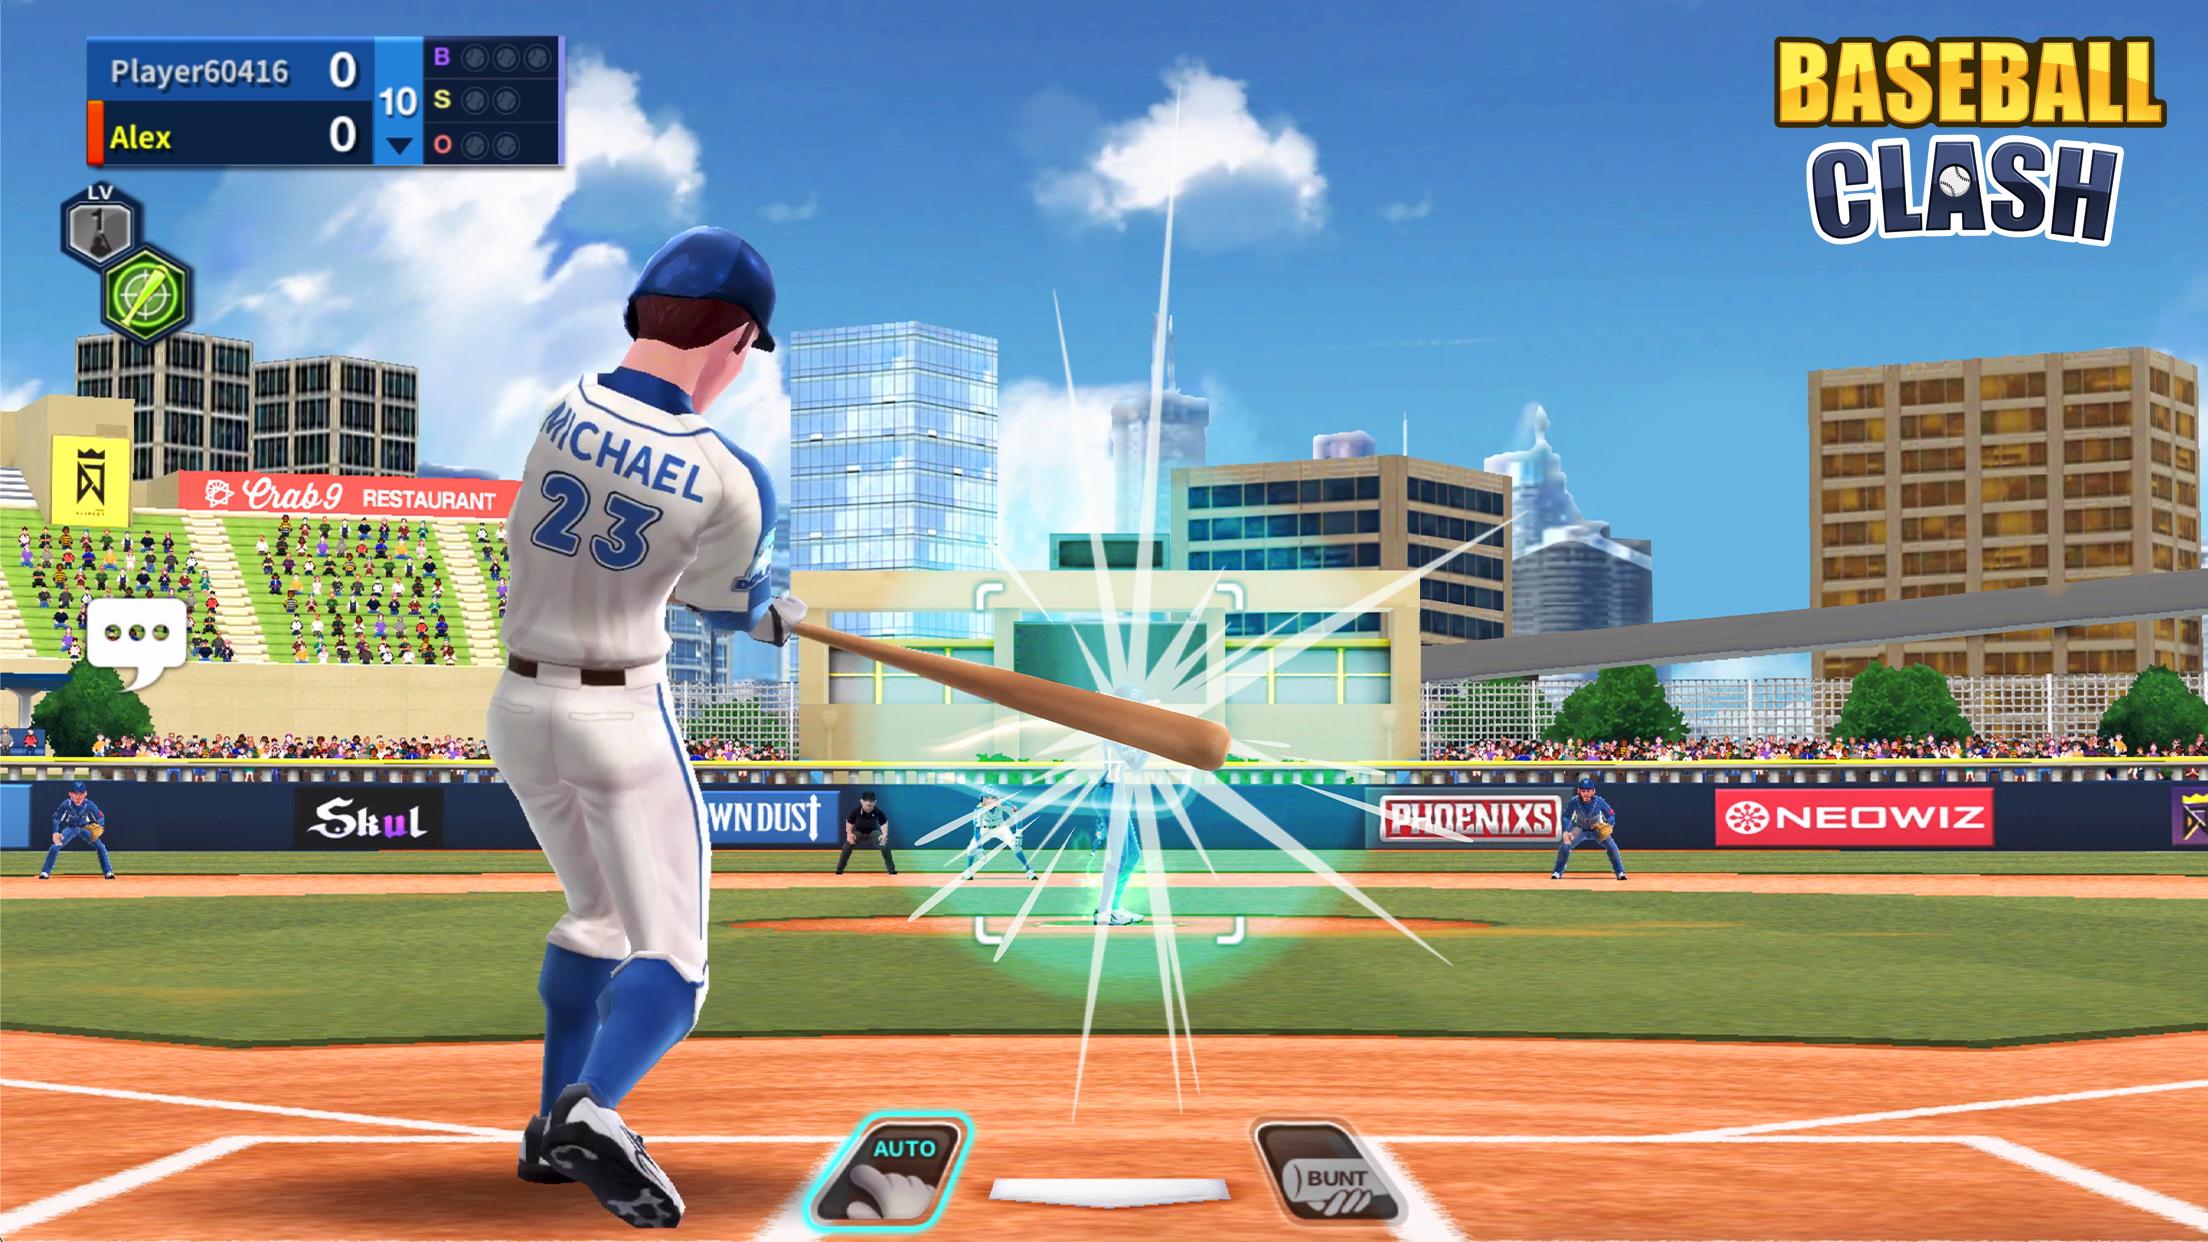 Quick игра. Real game time. Game time 32 игры. Baseball Clash character.